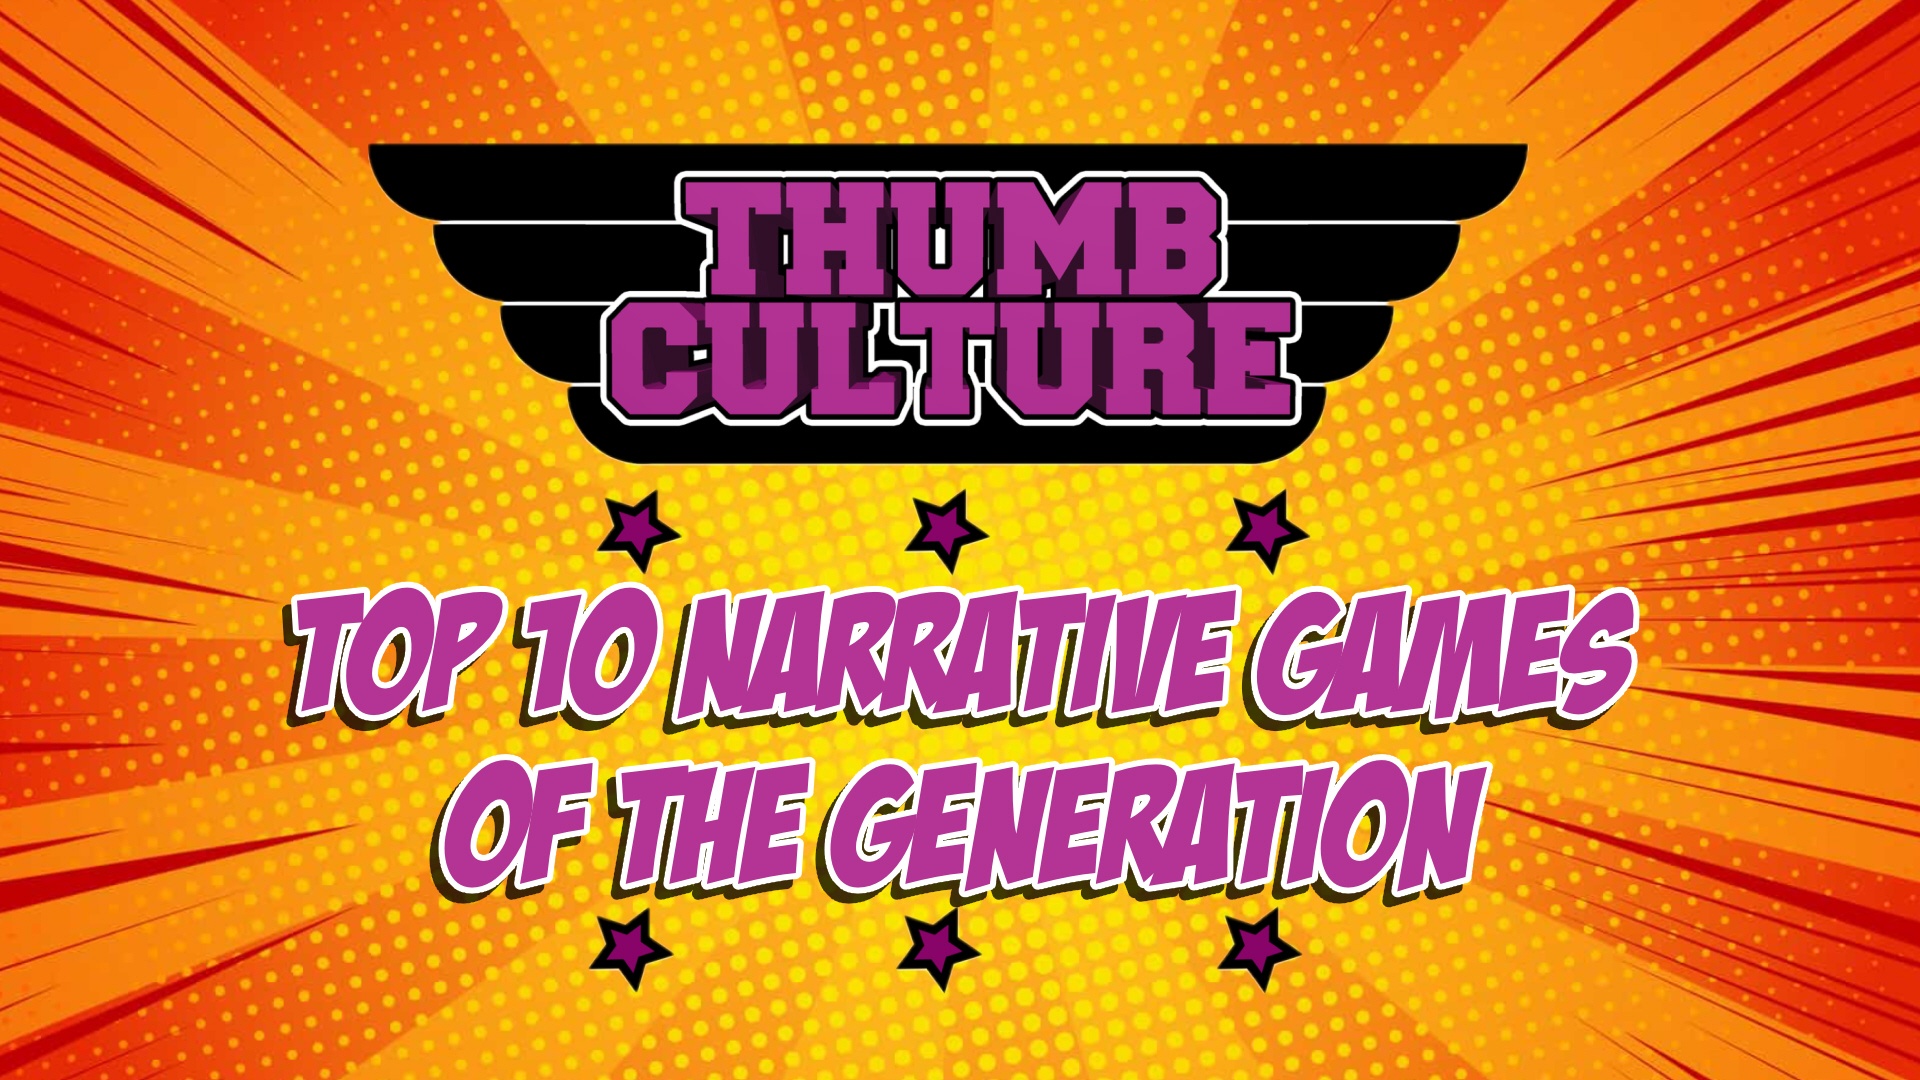 Top 10 Narrative Games of the Generation